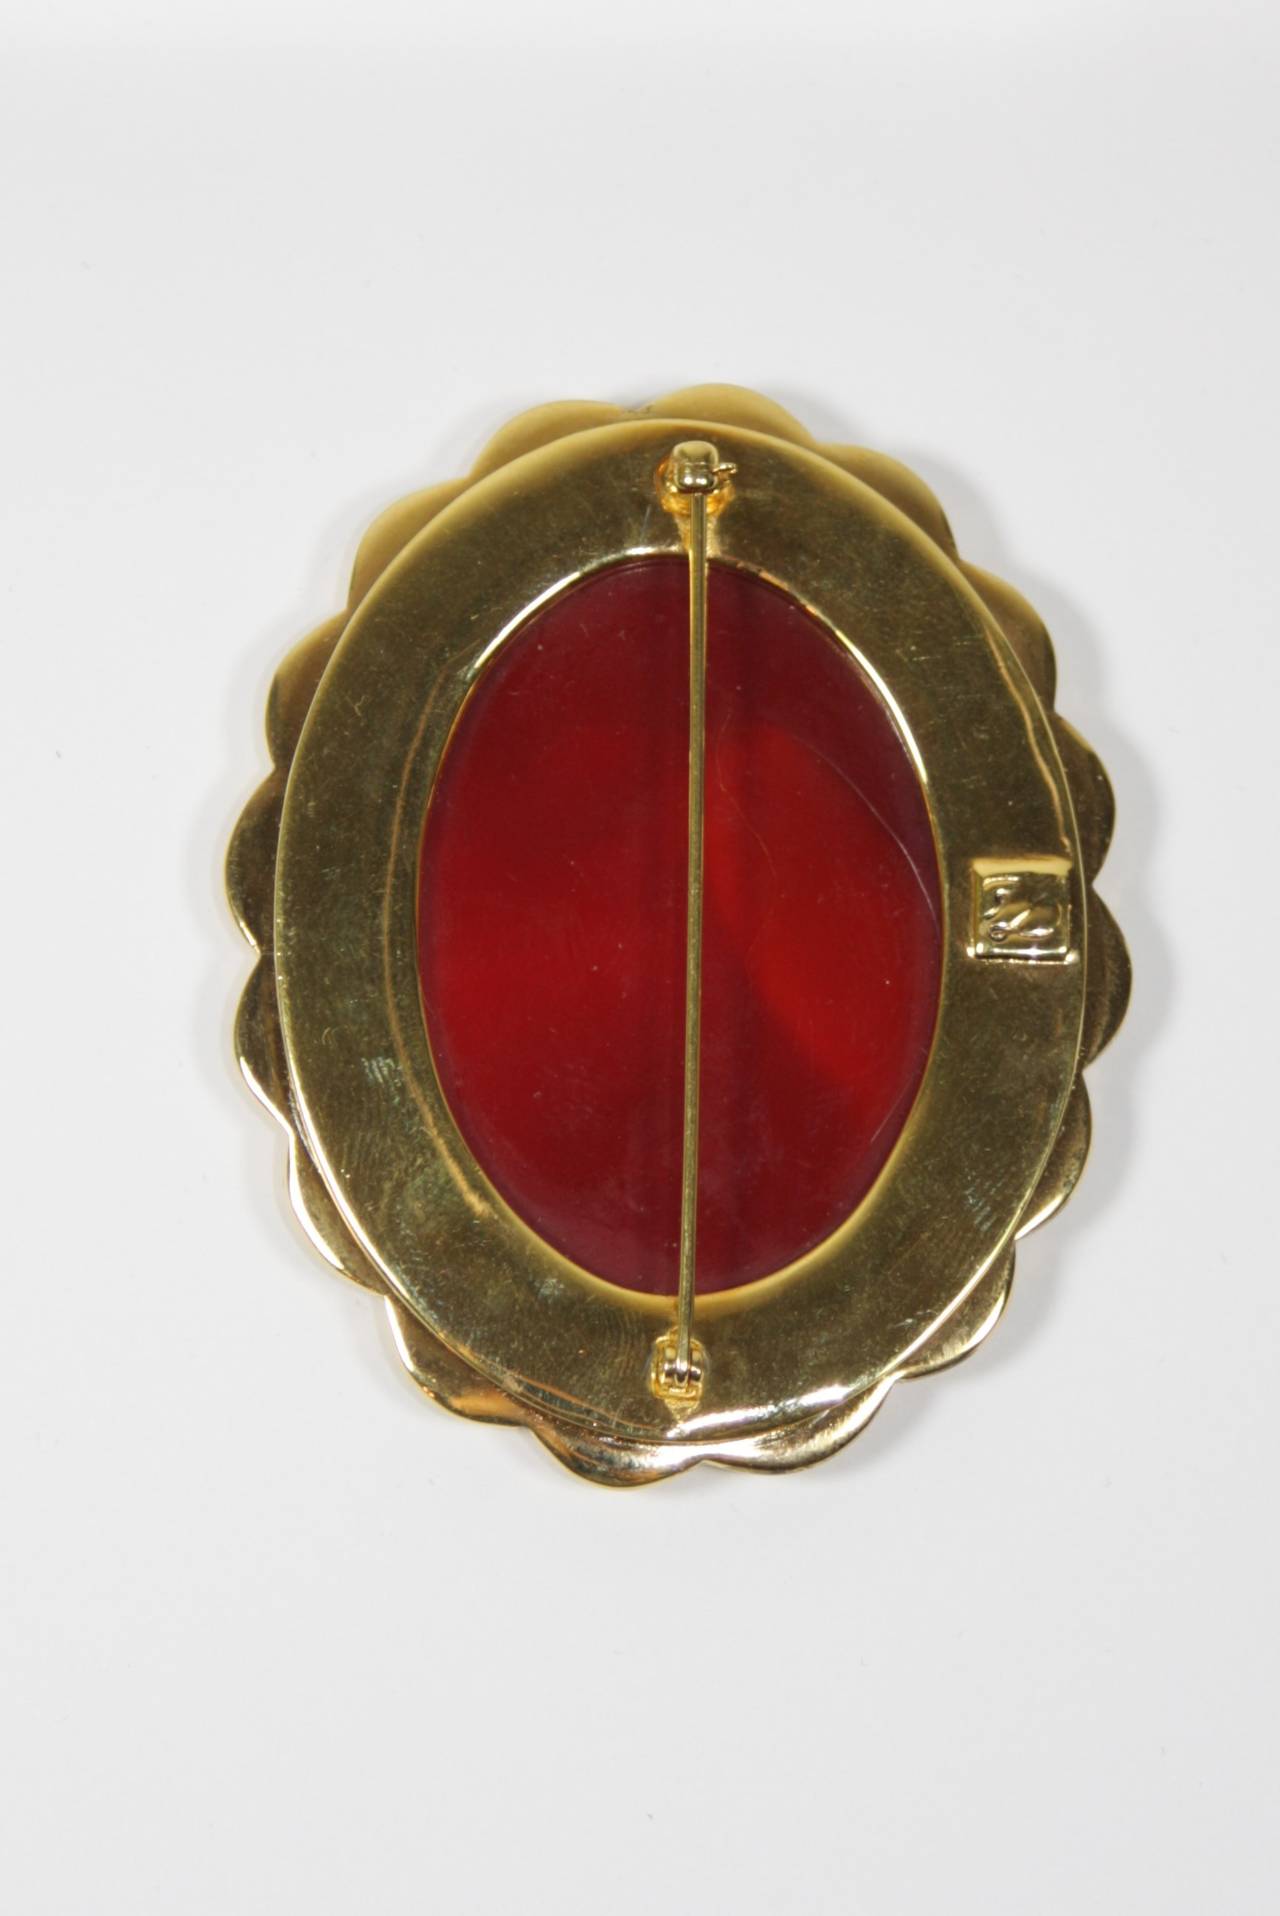 Karl Lagerfield Red Glass with KL Engraved Monogram in a Gold Tone Frame Brooch 1